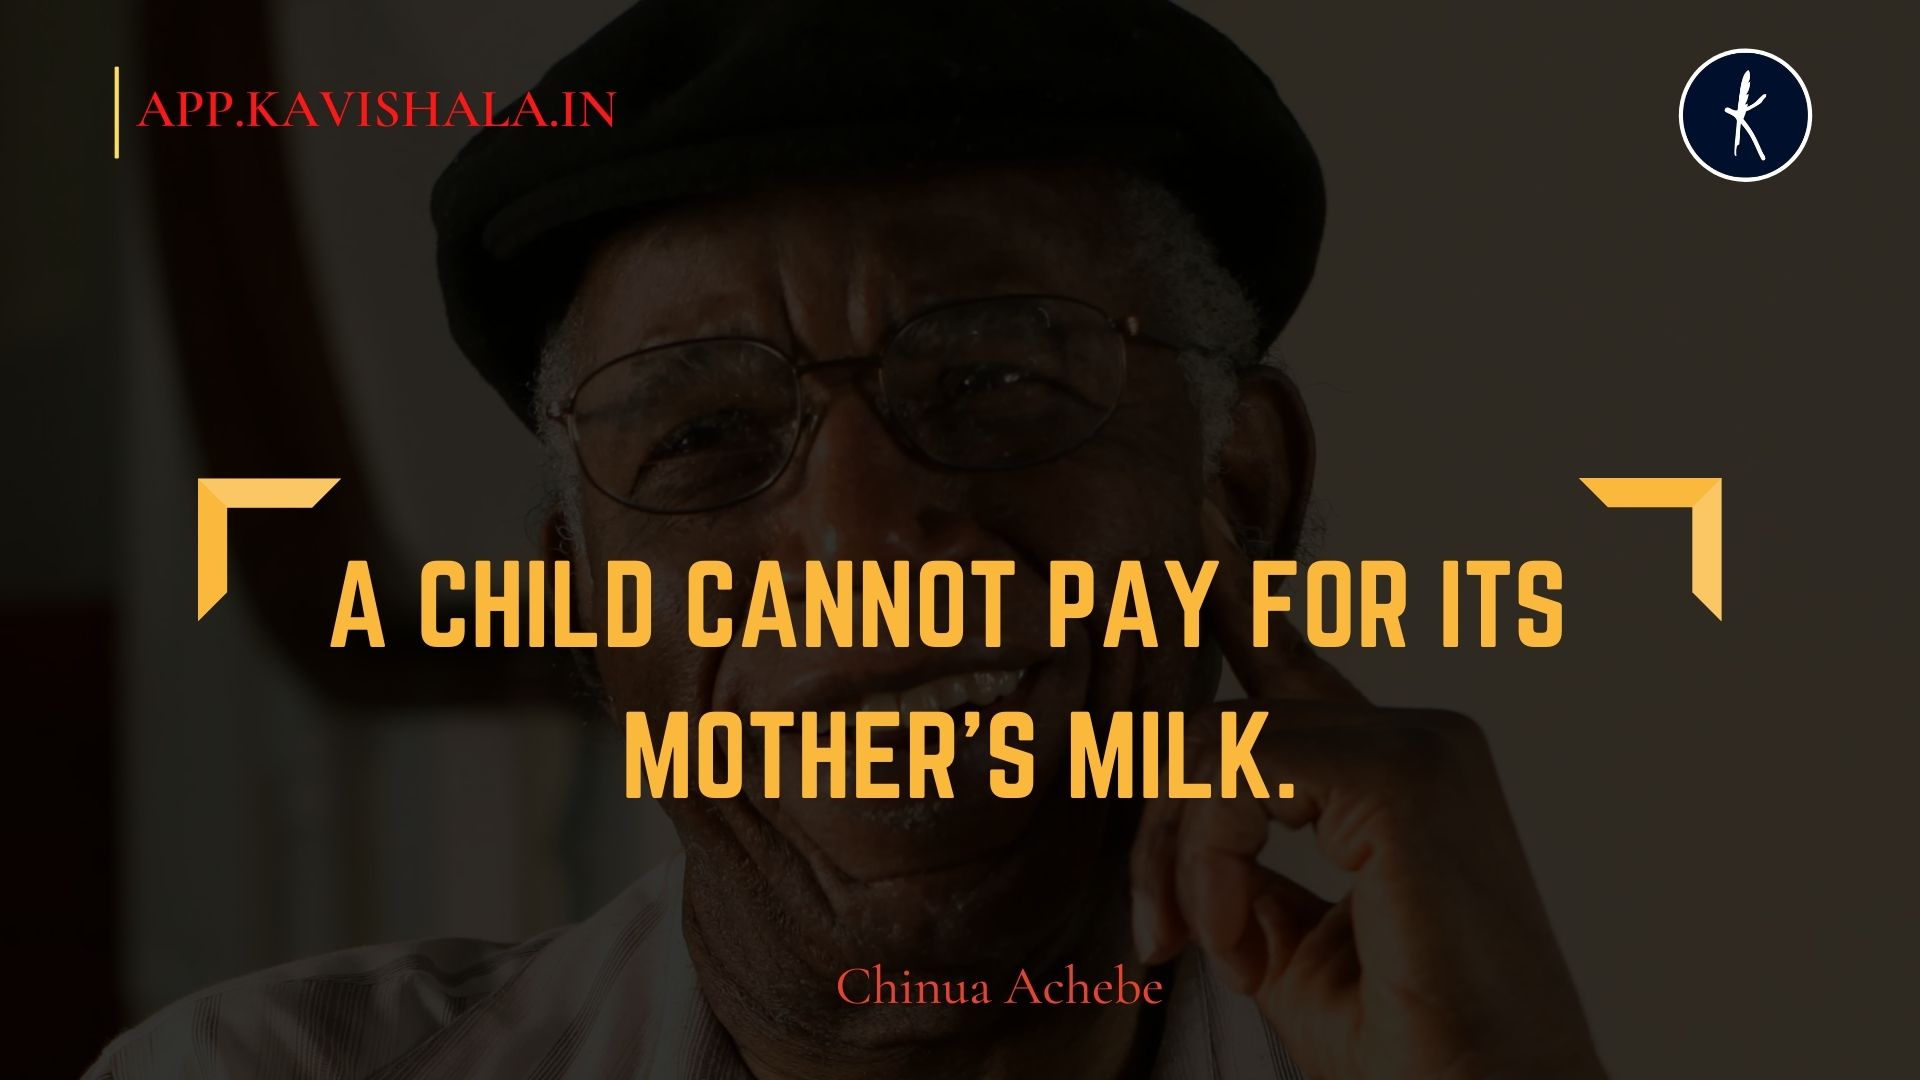 A child cannot pay for its mother’s milk. - Chinua Achebe's image